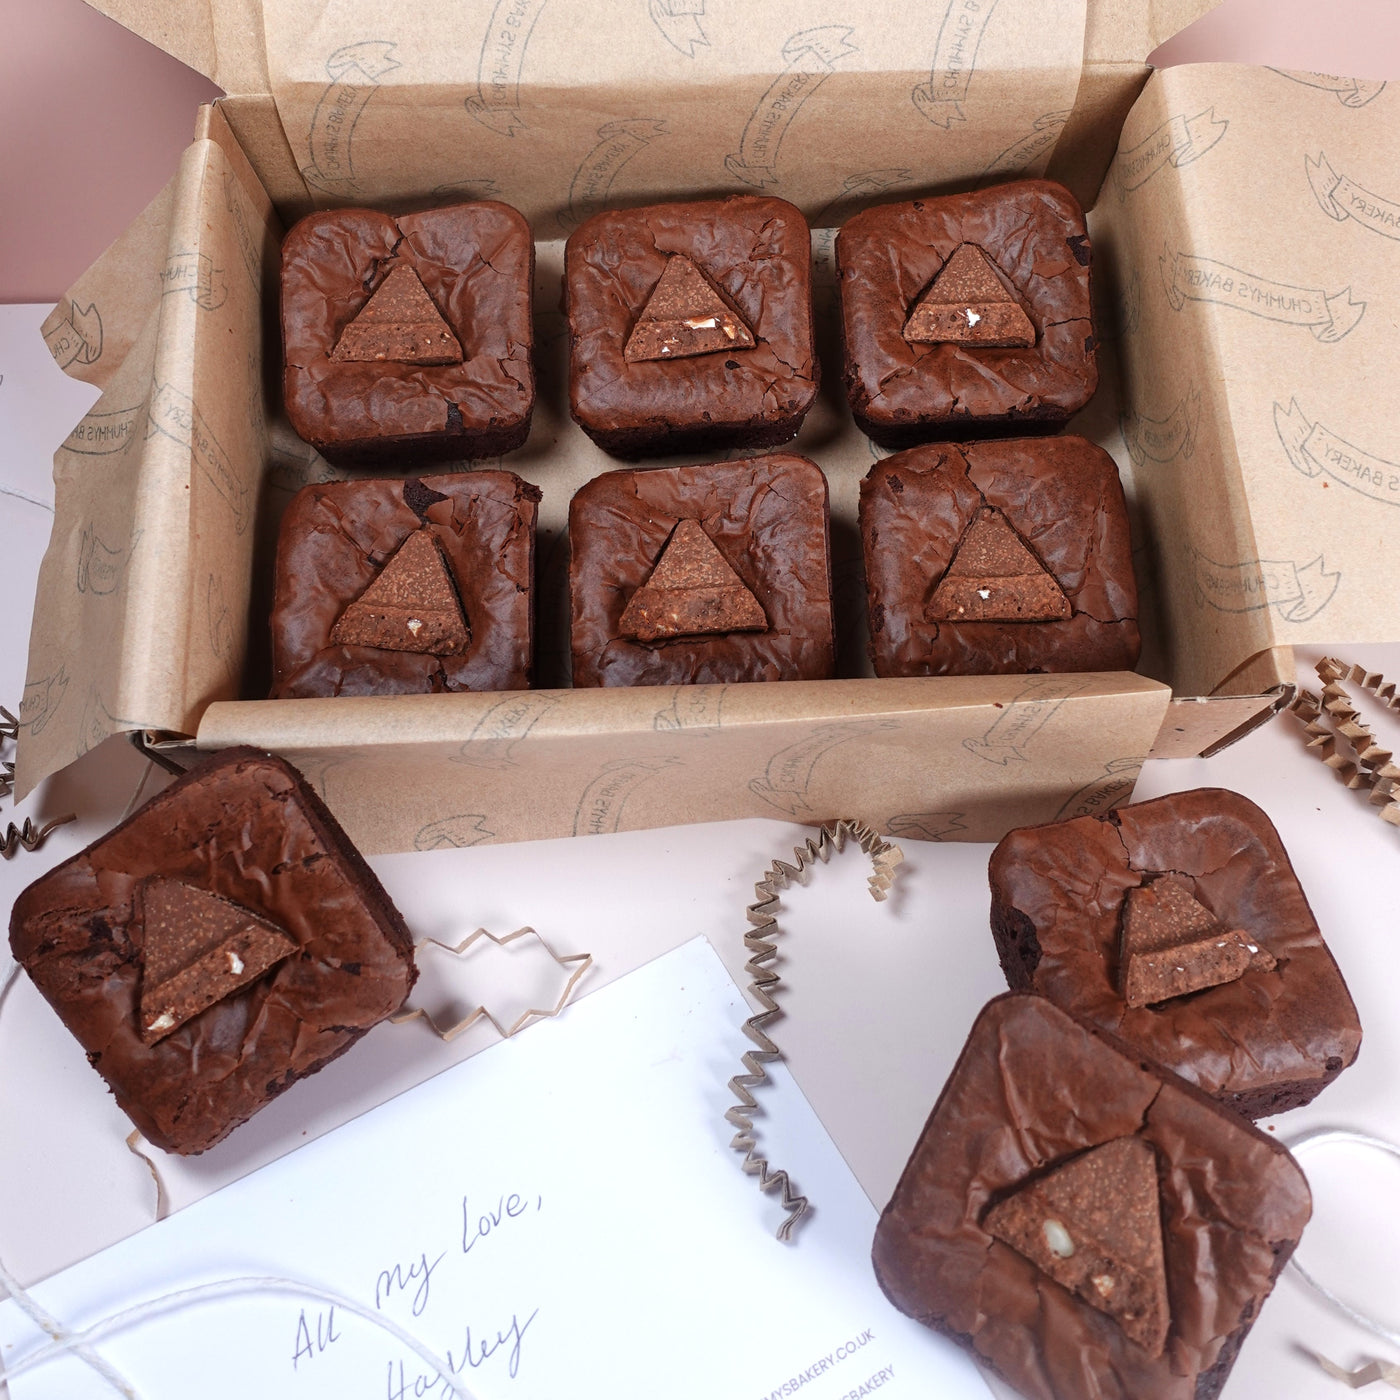 Limited Edition Toblerone Brownie Box - Delivered To Your Door